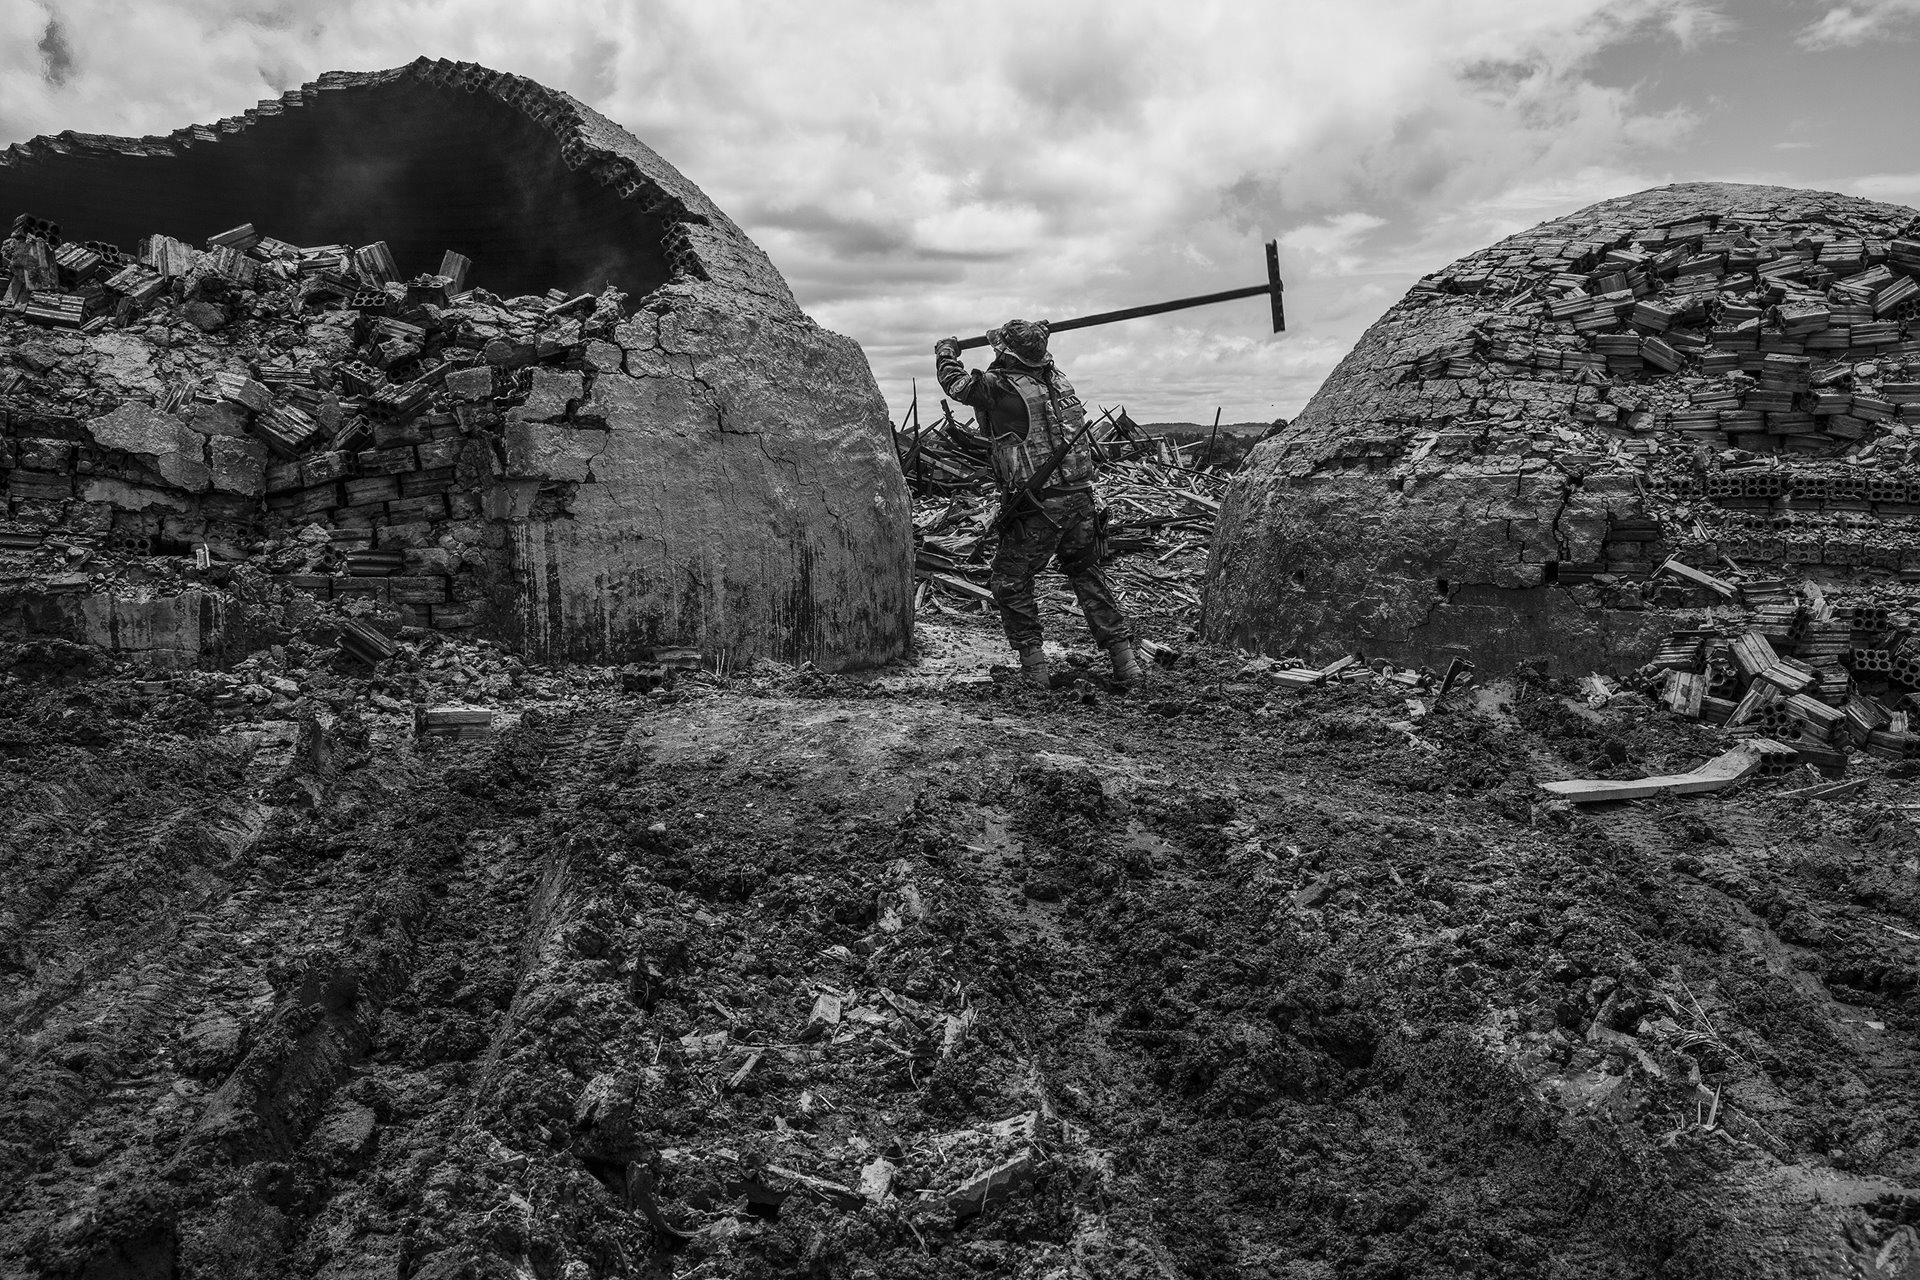 A member of the Specialized Inspection Group (GEF), a part of &nbsp;the Brazilian Institute of the Environment and Renewable Natural Resources (IBAMA), Brazil&#39;s environmental protection agency, destroys brick furnaces that were used to make charcoal at an illegal sawmill. The wood used in the sawmill was extracted illegally from the Alto Turiaçu Indigenous Land.